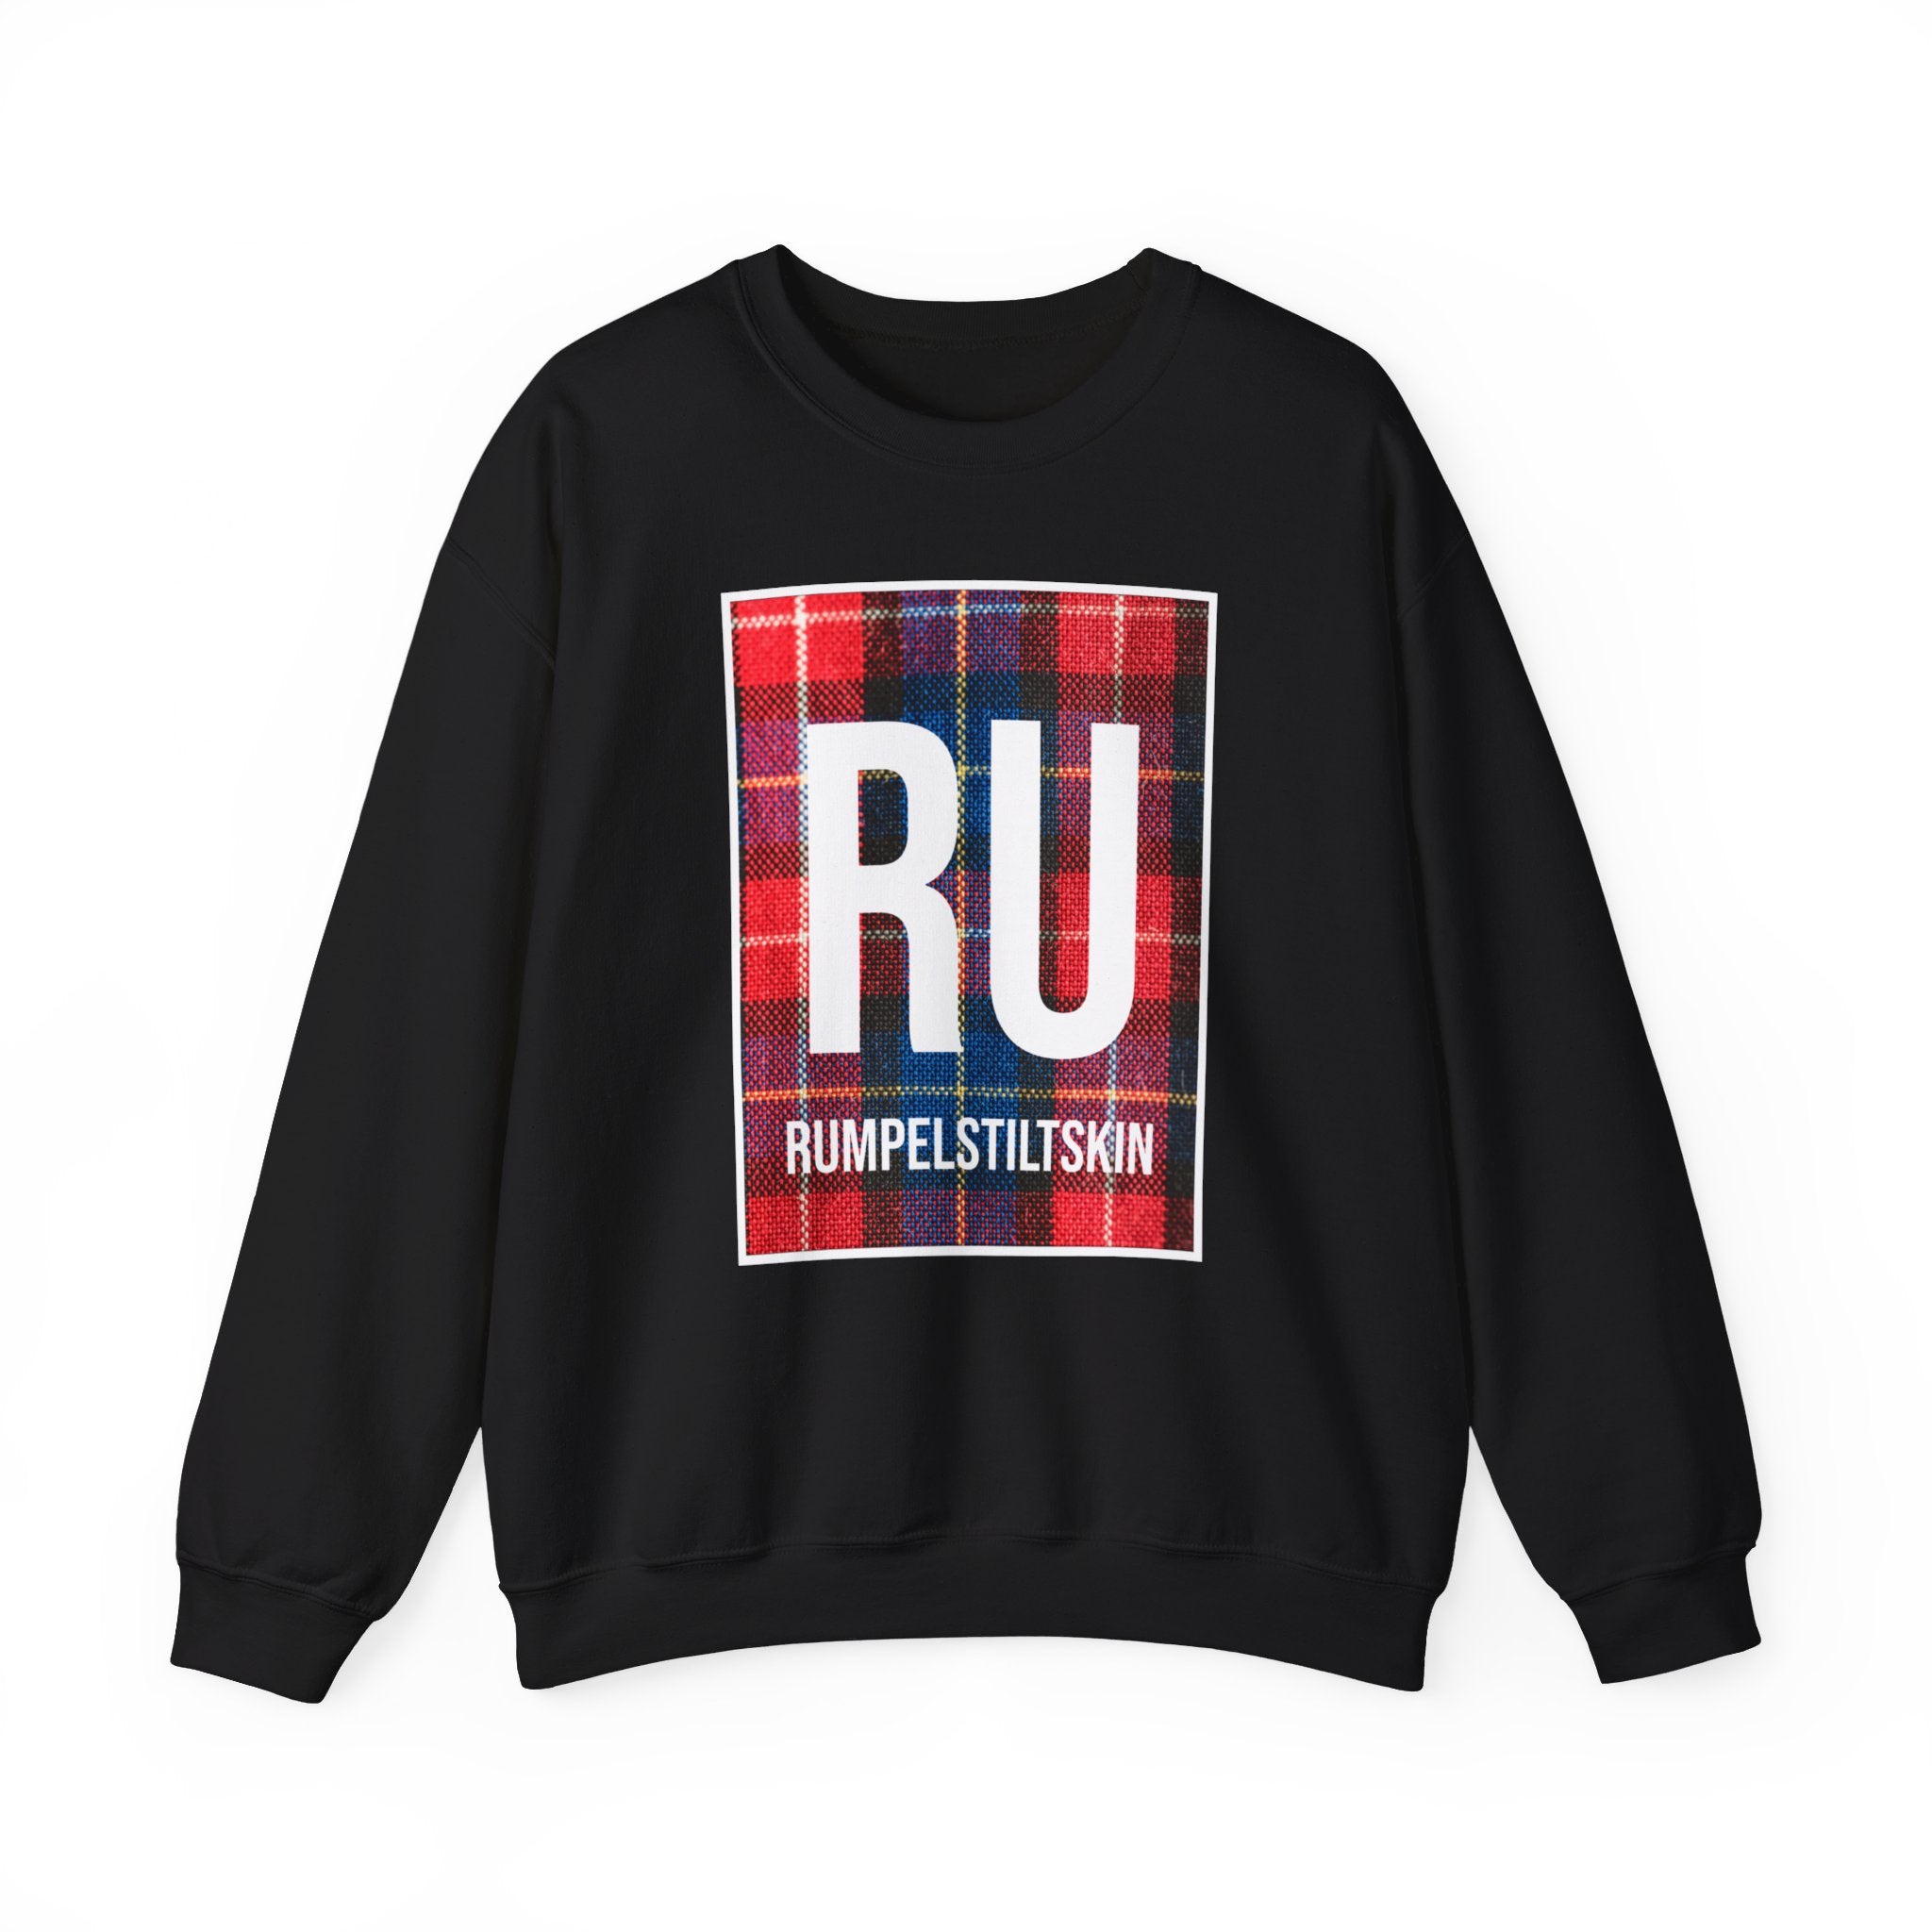 Black RU - Sweatshirt with a large front graphic displaying the text "RU RUMPELSTILTSKIN" over a colorful plaid background, perfect for cozy colder months.